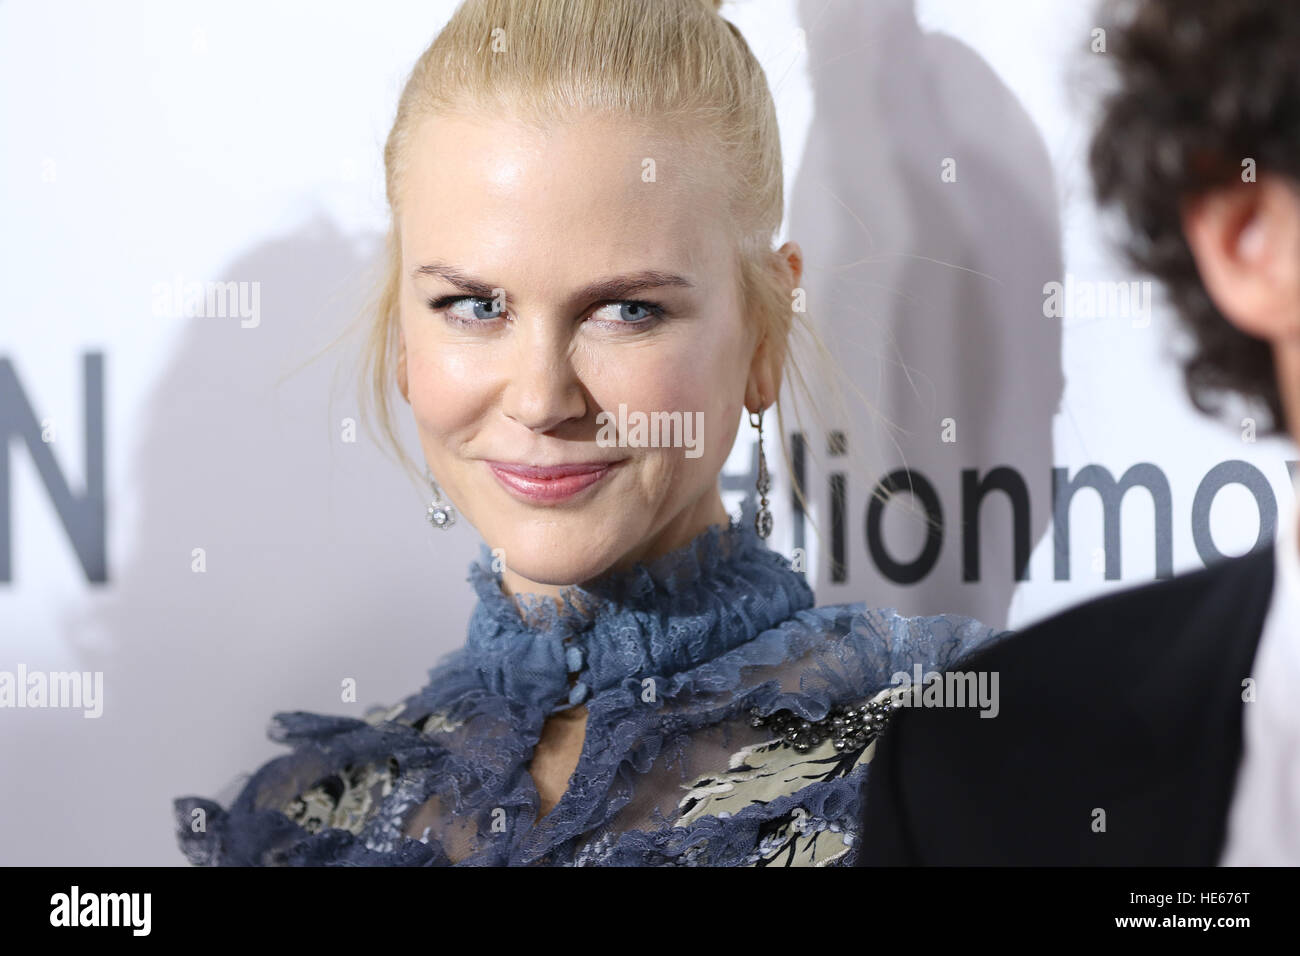 Sydney, Australia. 19 December 2016. Pictured: Nicole Kidman. The cast and crew of LION arrived on the red carpet for the Australian premiere at the State Theatre in Sydney.  The highly anticipated film comes from the producers of The King’s Speech and is based on the incredible true story of Saroo Brierley. Saroo is portrayed by Dev Patel in the film and his parents John and Sue Brierley are played by Nicole Kidman and David Wenham – the Brierley family will join the cast on the red carpet. Credit: © Richard Milnes/Alamy Live News Stock Photo